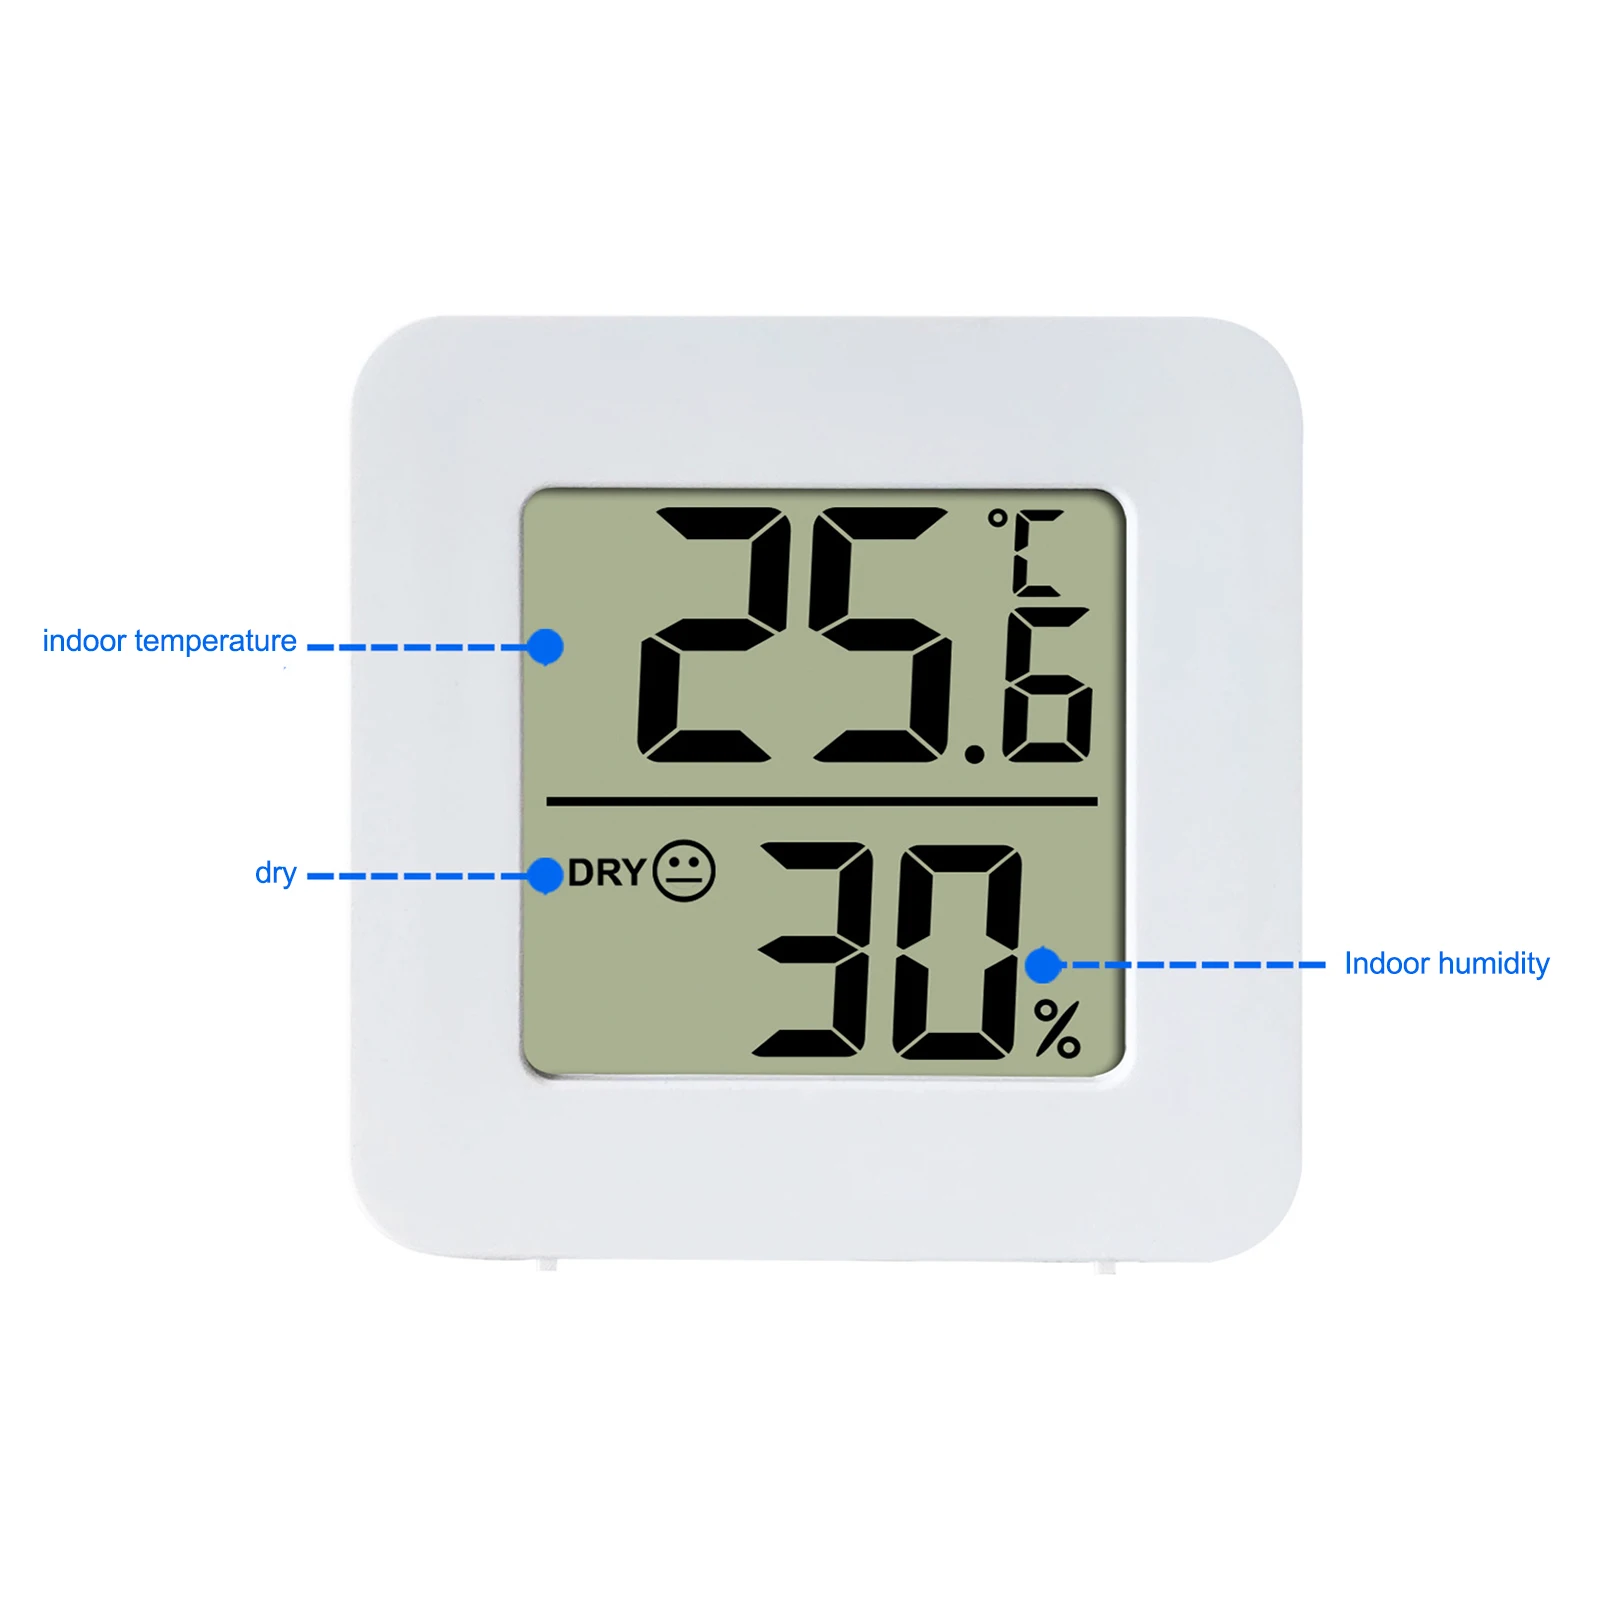 https://ae01.alicdn.com/kf/Sc0d3cf8cfb1a4ad59528cbac0f67f8c3g/LCD-Digital-Thermometer-Hygrometer-Indoor-Electronic-Temperature-Humidity-Meter-Sensor-Gauge-Weather-Station-High-Precision.jpeg